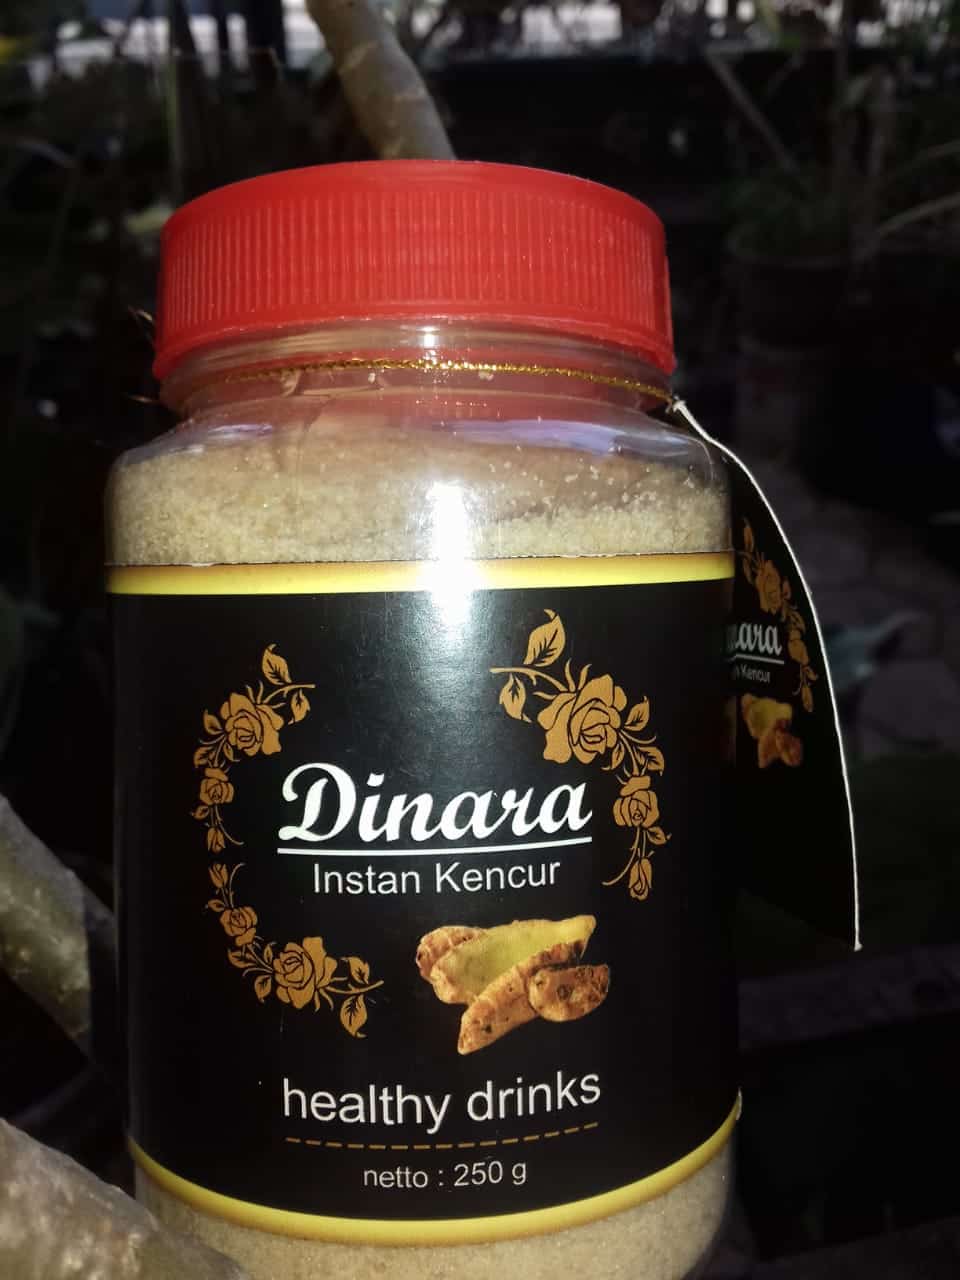 instan galangal healty drinks (Kaempferia Galanga) contains essential oils that have been used in herbal medicine in China to treat indigestion, colds, shortness of breath and abdominal pain  to heada